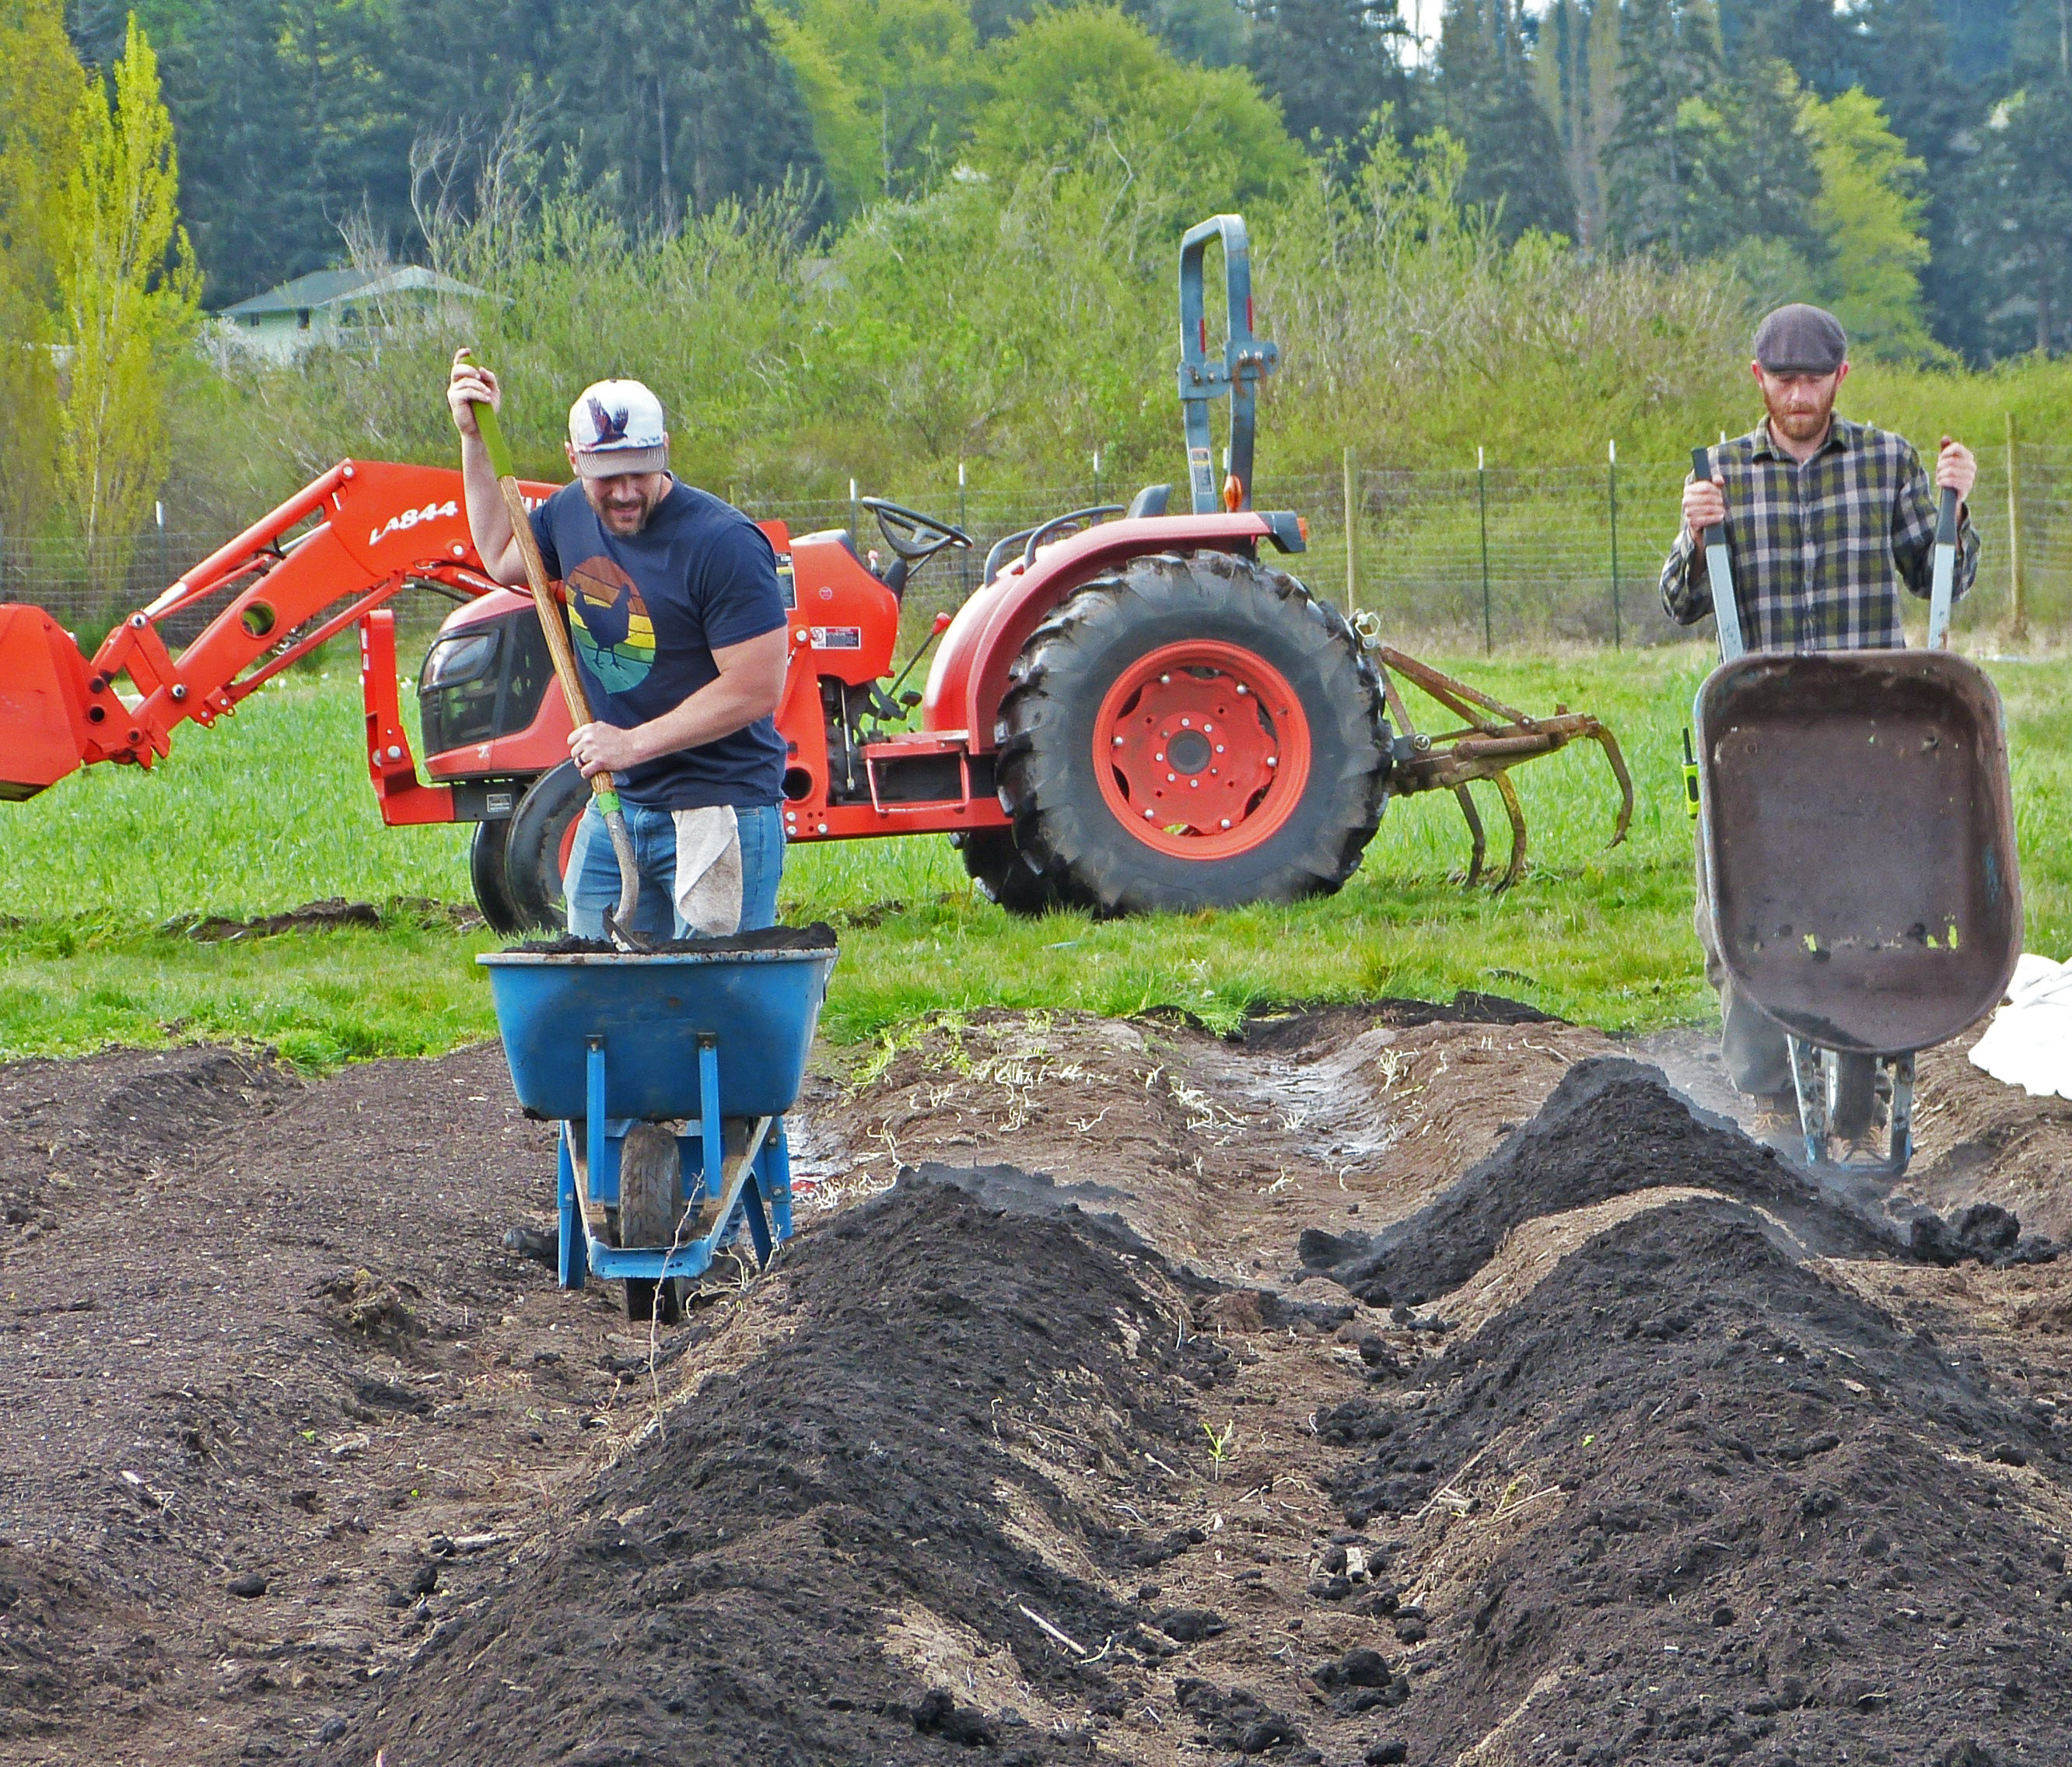 New Trainee (Josh Christopher) and Field Assistant (Dalton Lischalk) measure out compost from Cedar Grove onto beds scheduled for planting. Because farms distribute their produce off-site, they can’t be a “closed loop system” - but by sourcing compost that has been made from food and yard waste in neighboring King County, the Organic Farm School gets closer to that goal.